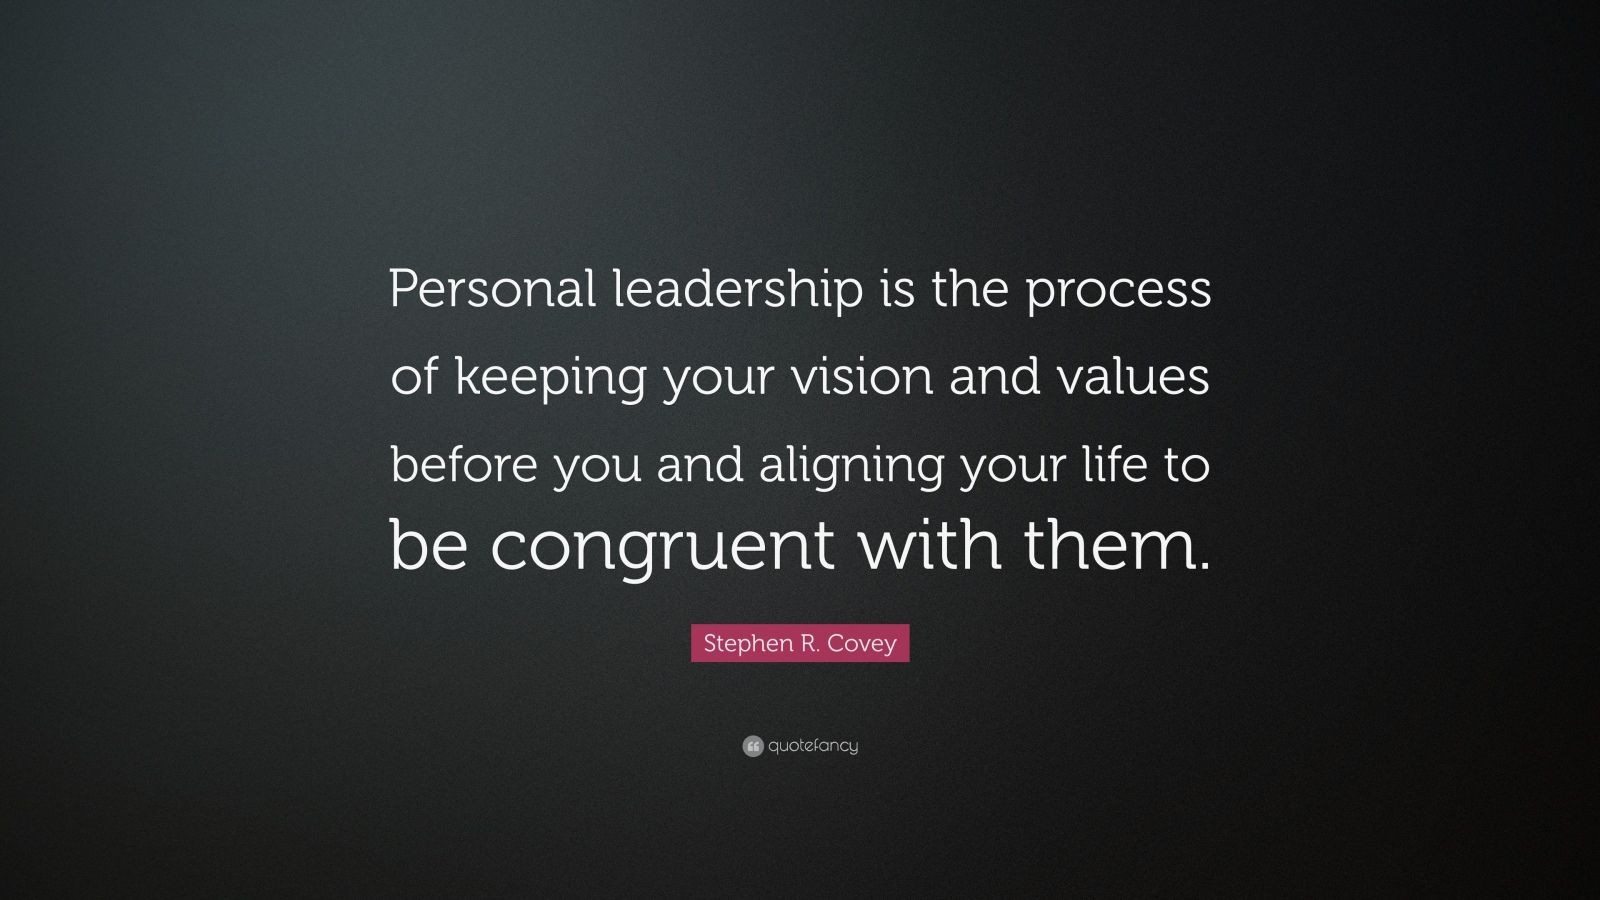 Leadership Vision Quotes
 Stephen R Covey Quote “Personal leadership is the